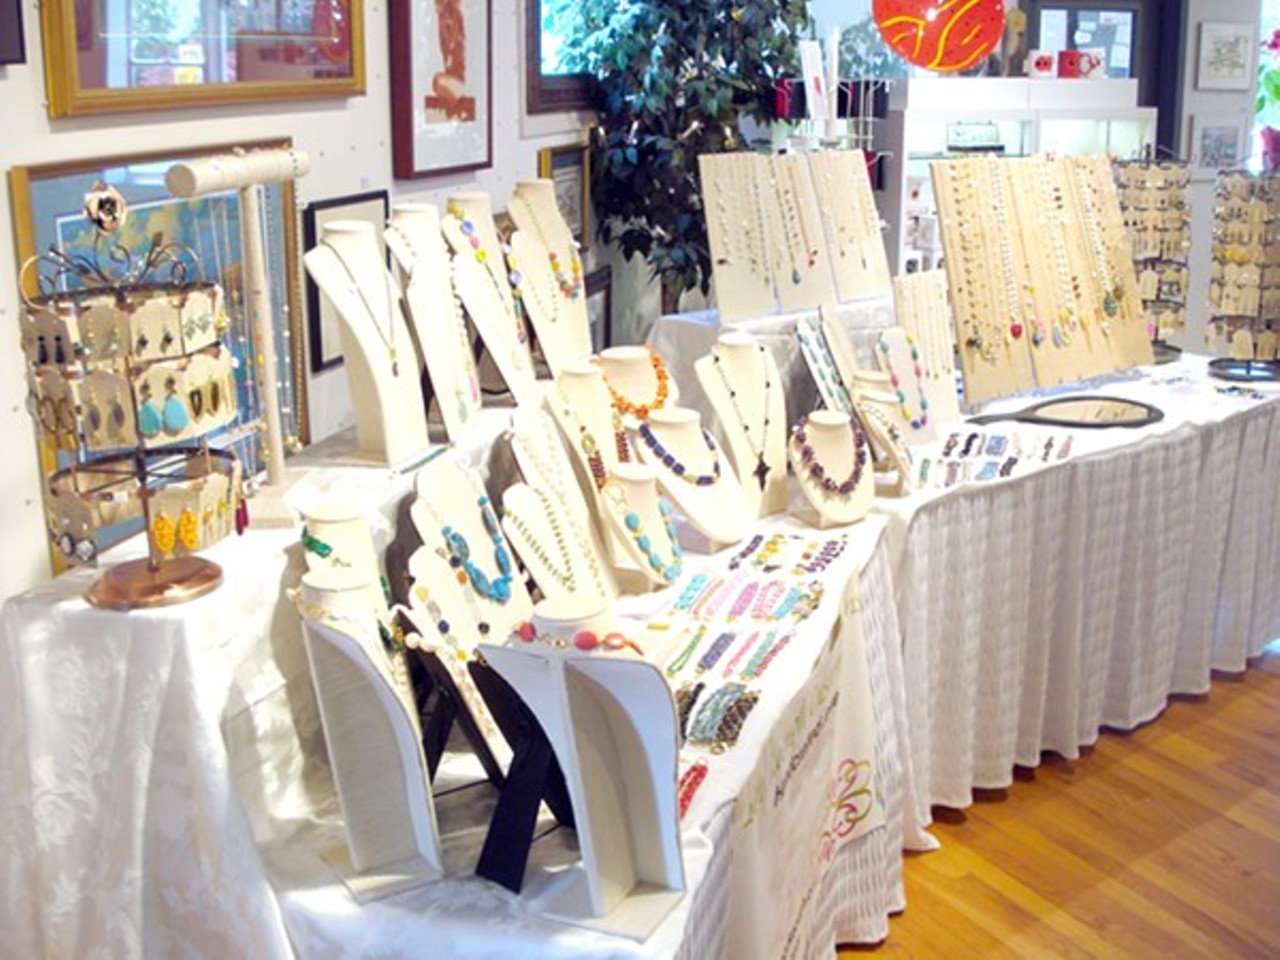 Sip & Shop Jewelry Trunk Show
September 22, 2018
Here you can get drunk and buy jewelry in person instead of just getting drunk and buying jewelry online! This event is free and open to the public.
Check it out here.
Photo courtesy of Norton's Fine Art